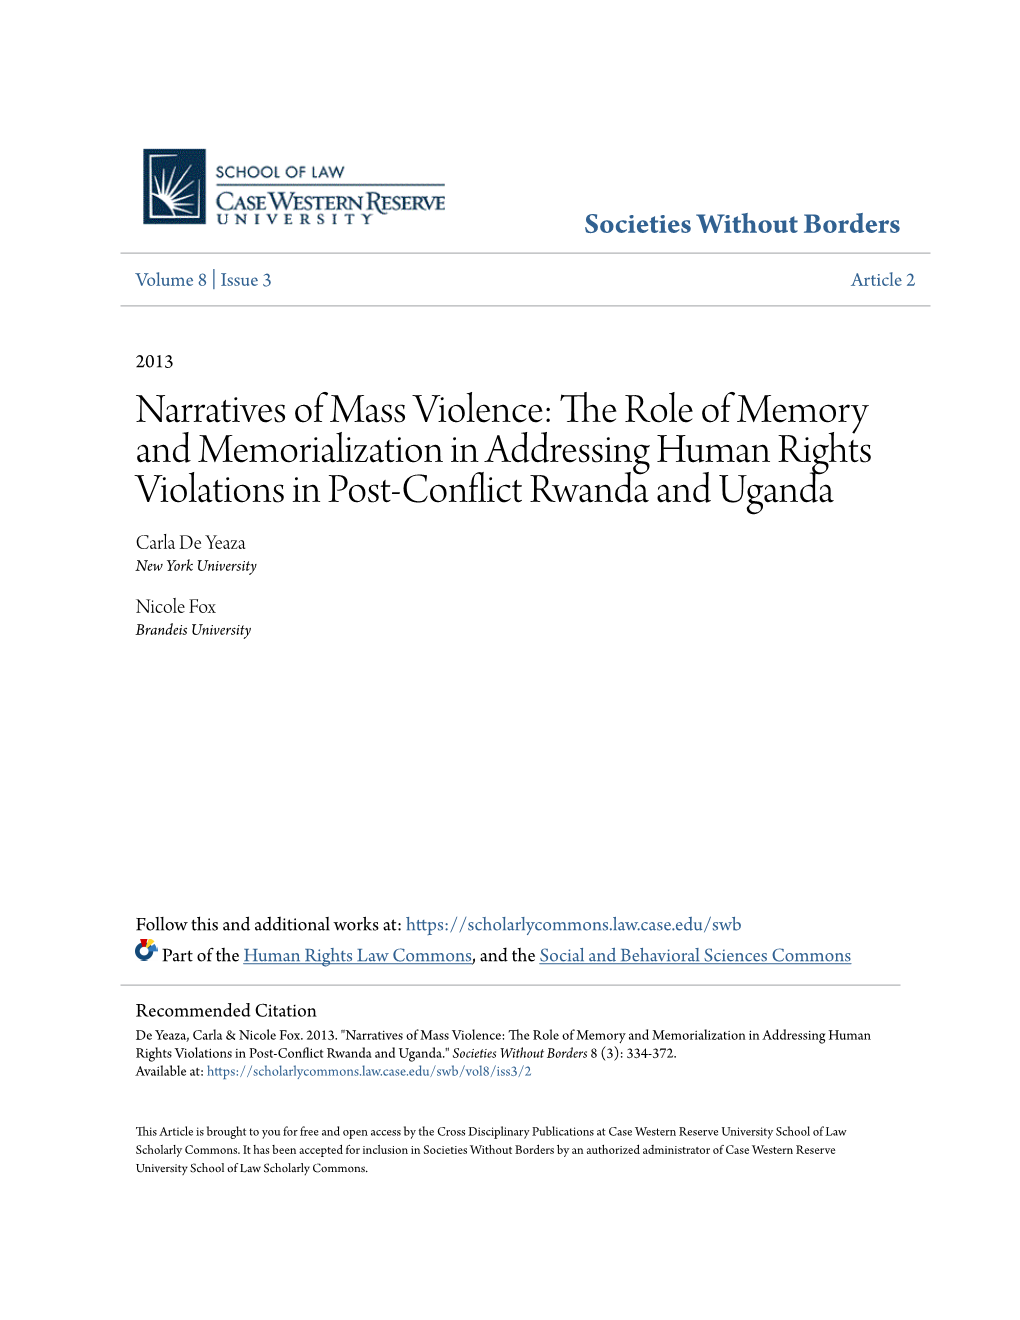 The Role of Memory and Memorialization in Addressing Human Rights Violations in Post-Conflict Rwanda and Uganda Carla De Yeaza New York University